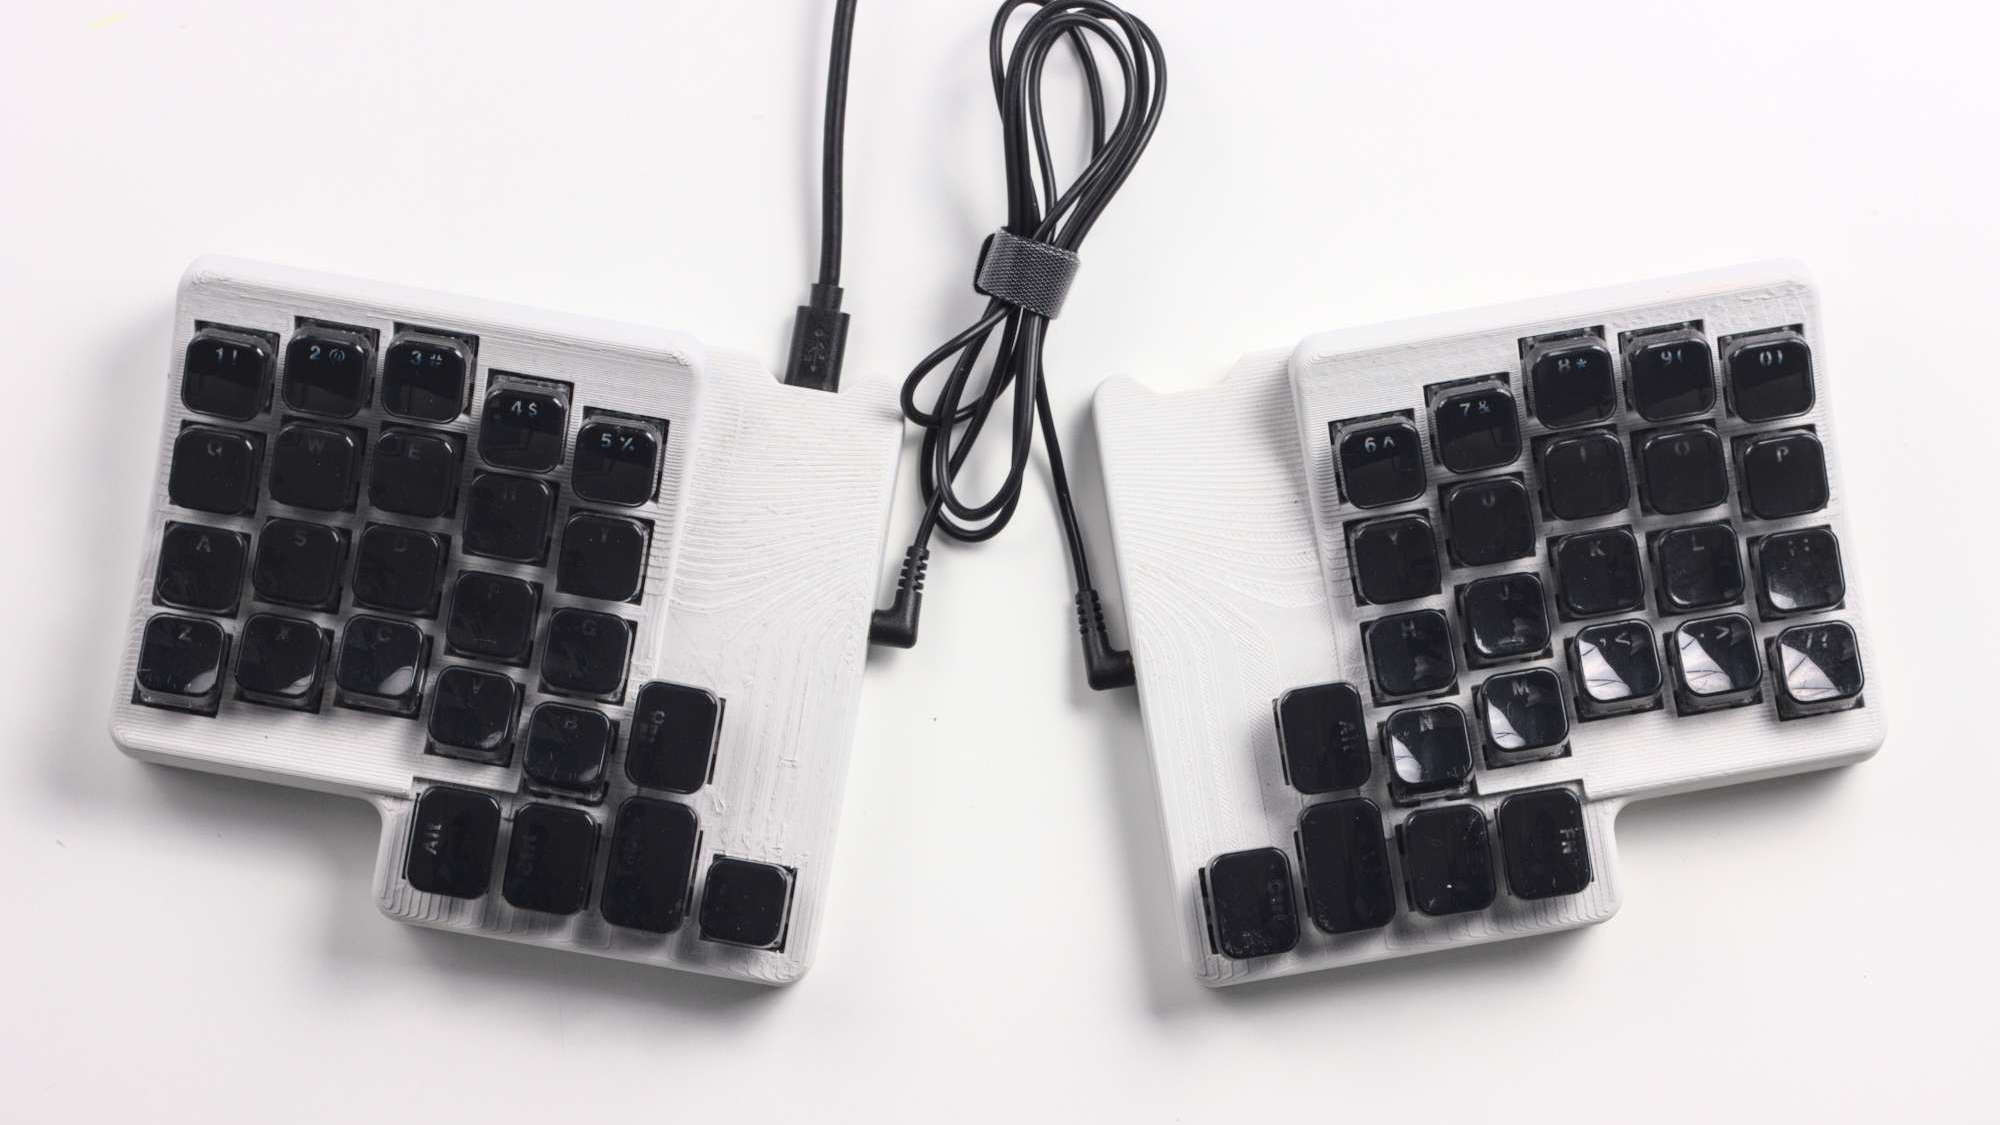 Preview of my keyboard design experiments